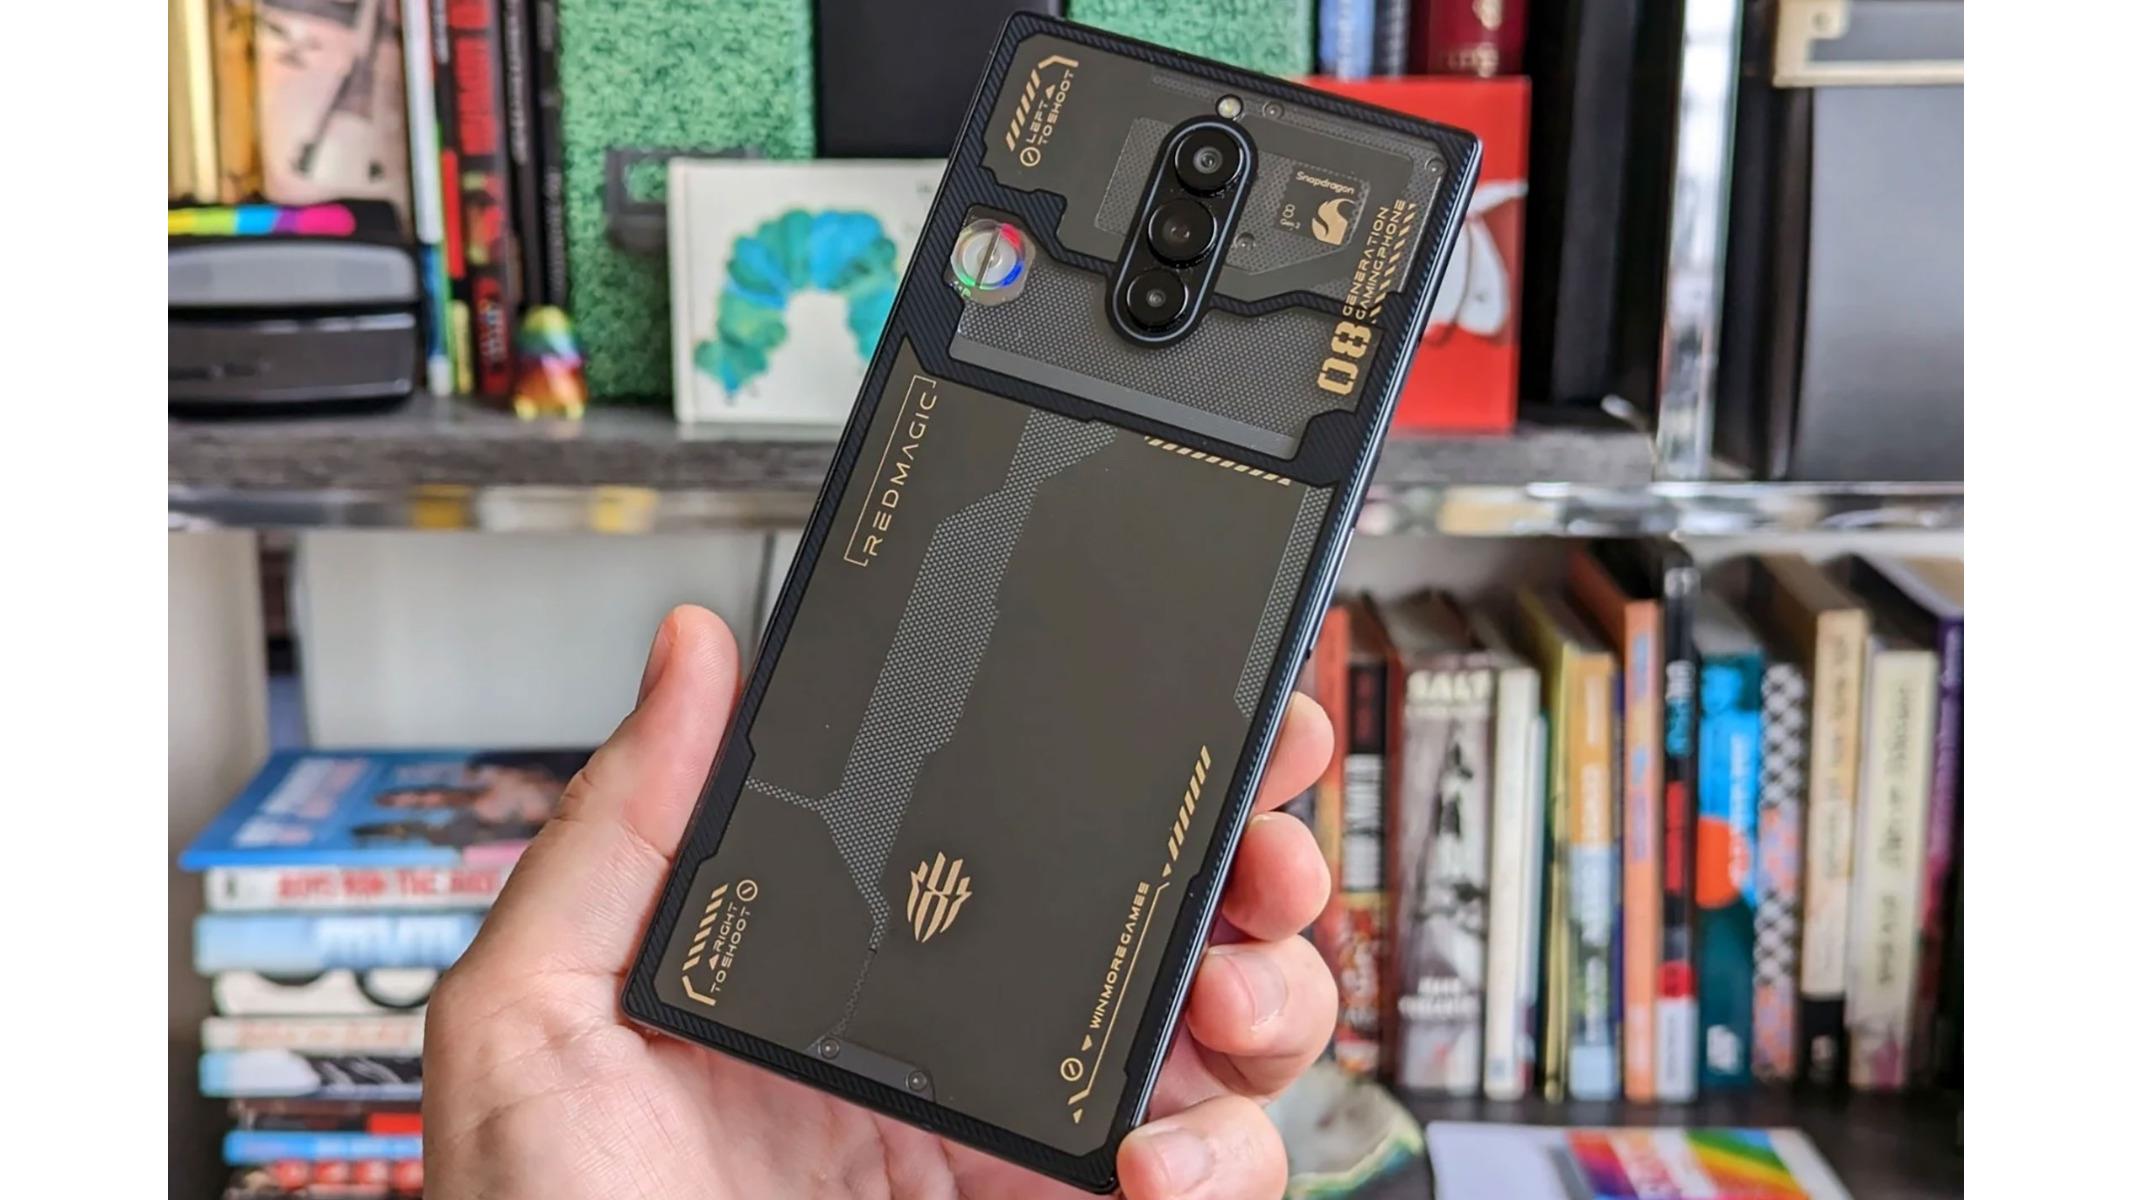 RedMagic 8 Pro Review: What to Know About This Lower-Priced Gaming Phone -  Video - CNET